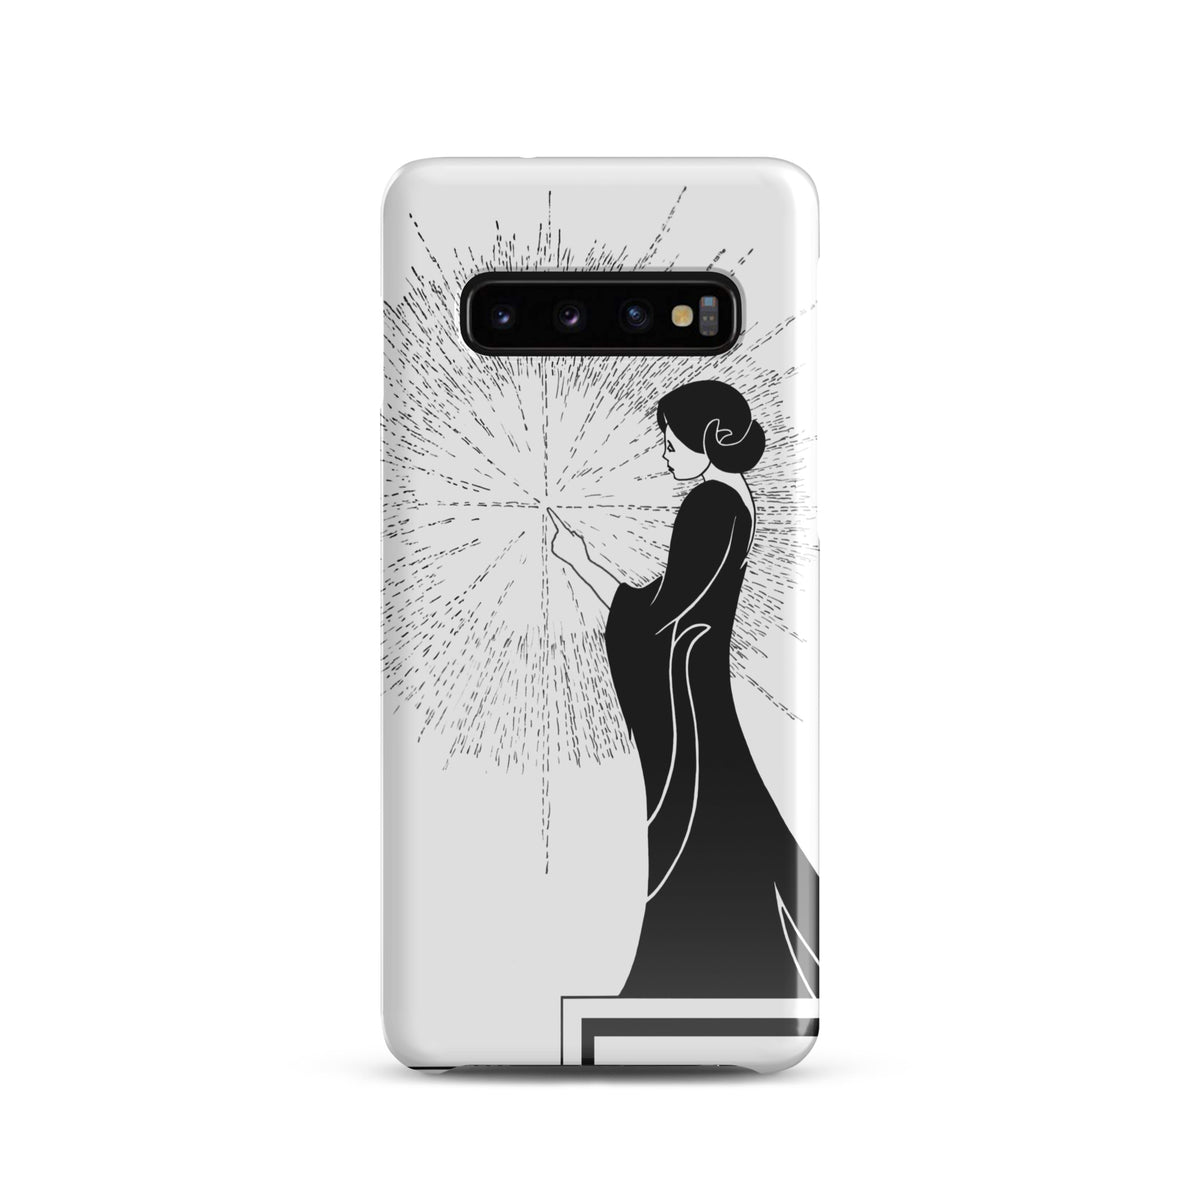 Samsung Phone Case with an ink drawing of a woman touching the spark of creation in an Art Deco style